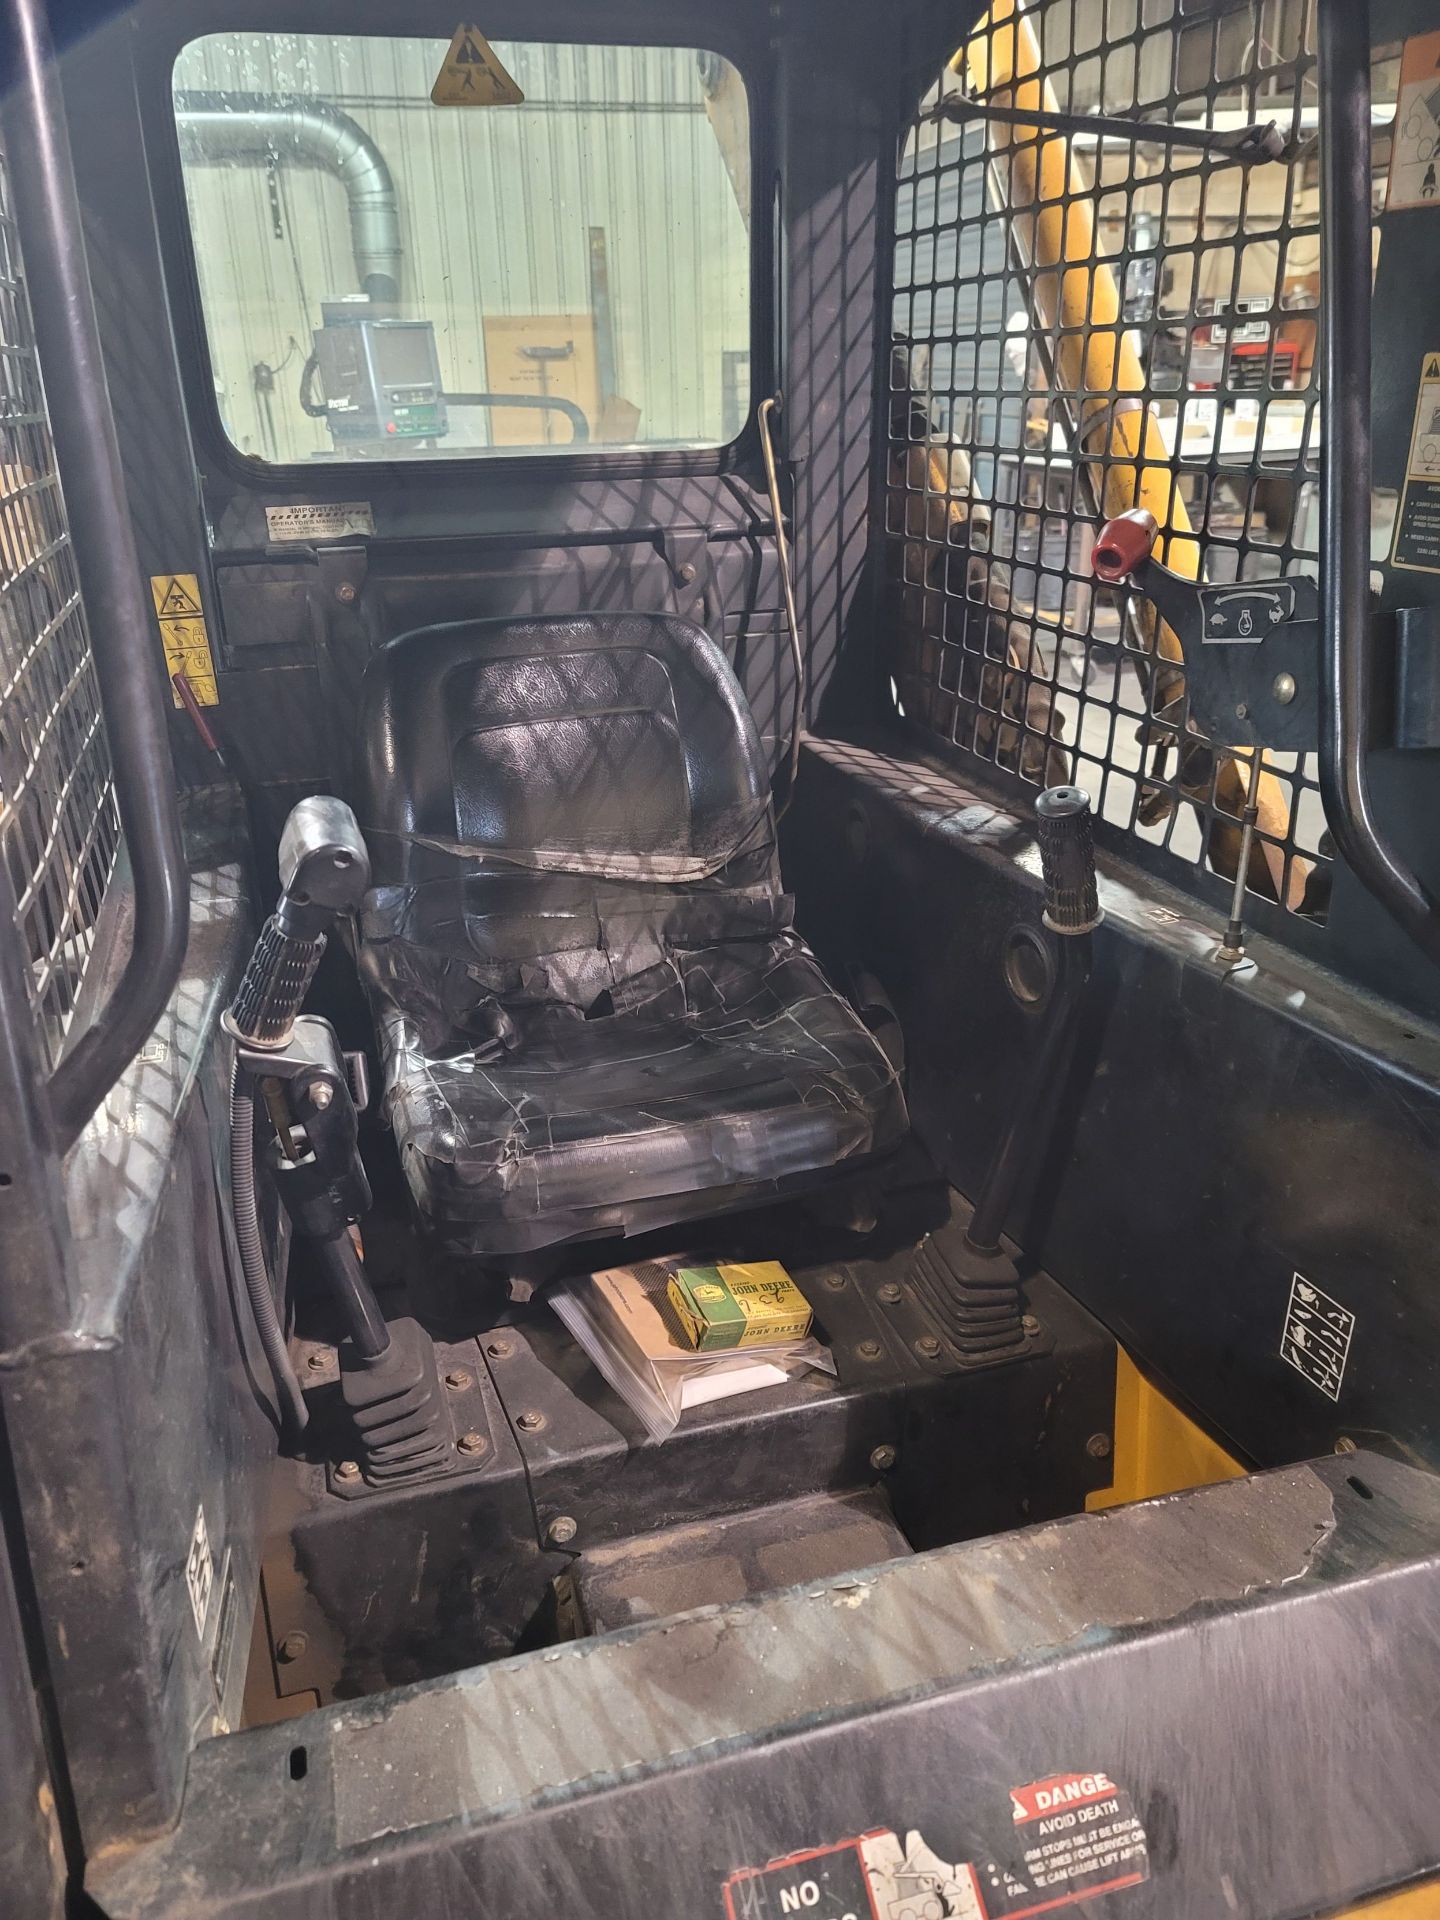 1998 JOHN DEERE 8875 ALL TERRAIN SKID STEER, WITH (5) ATTACHMNETS. SEE PICTURES. - Image 11 of 22